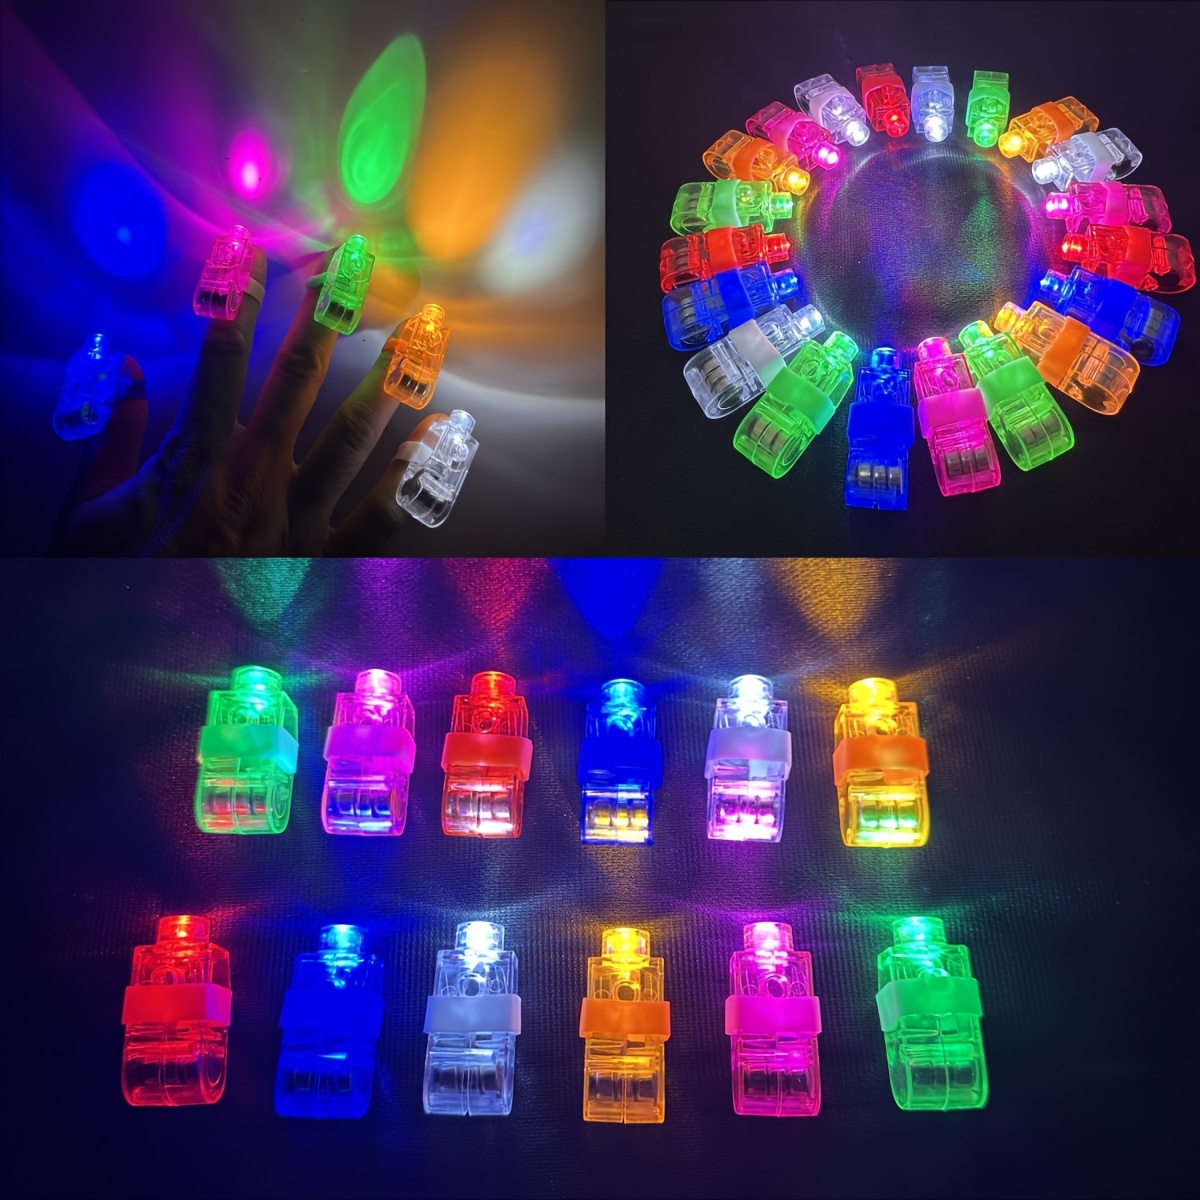 77 Pcs Christmas Glow in the Dark Party Favors, Led Light Up Party Supplies  with Finger Lights, Light Up Glasses, Glow Bracelets, Neon Hairpins and